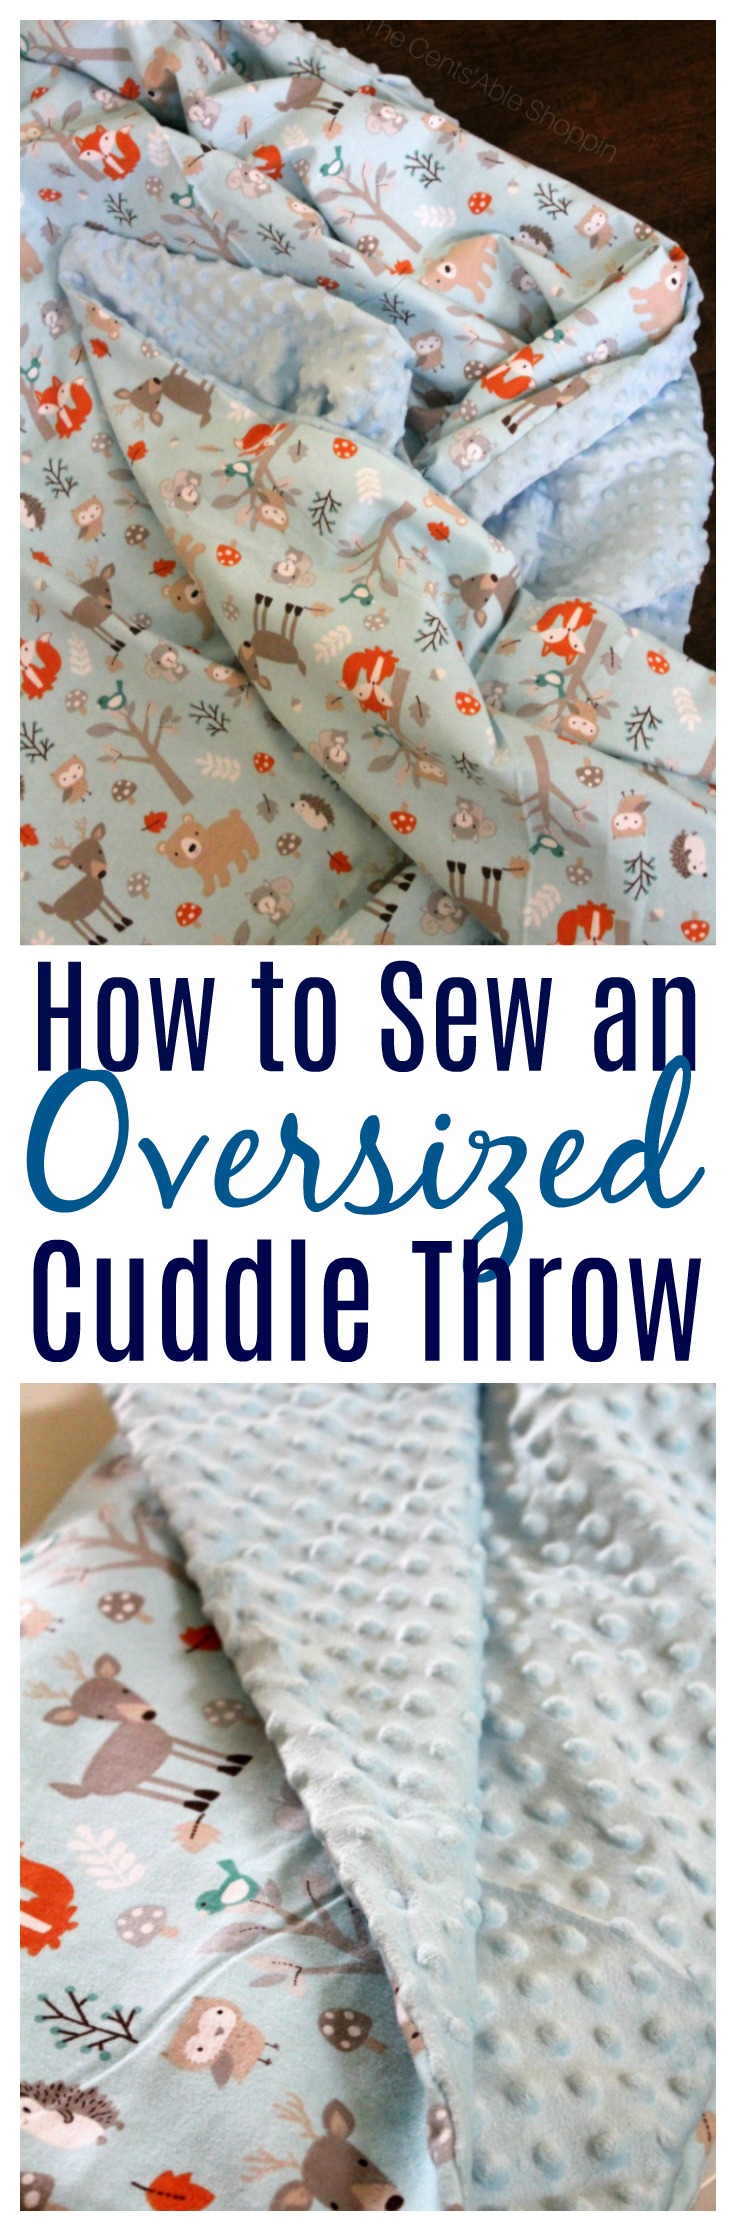 Homemade blankets make the best gifts! Learn how to sew an oversized cuddle throw and gift for family and friends this holiday season!